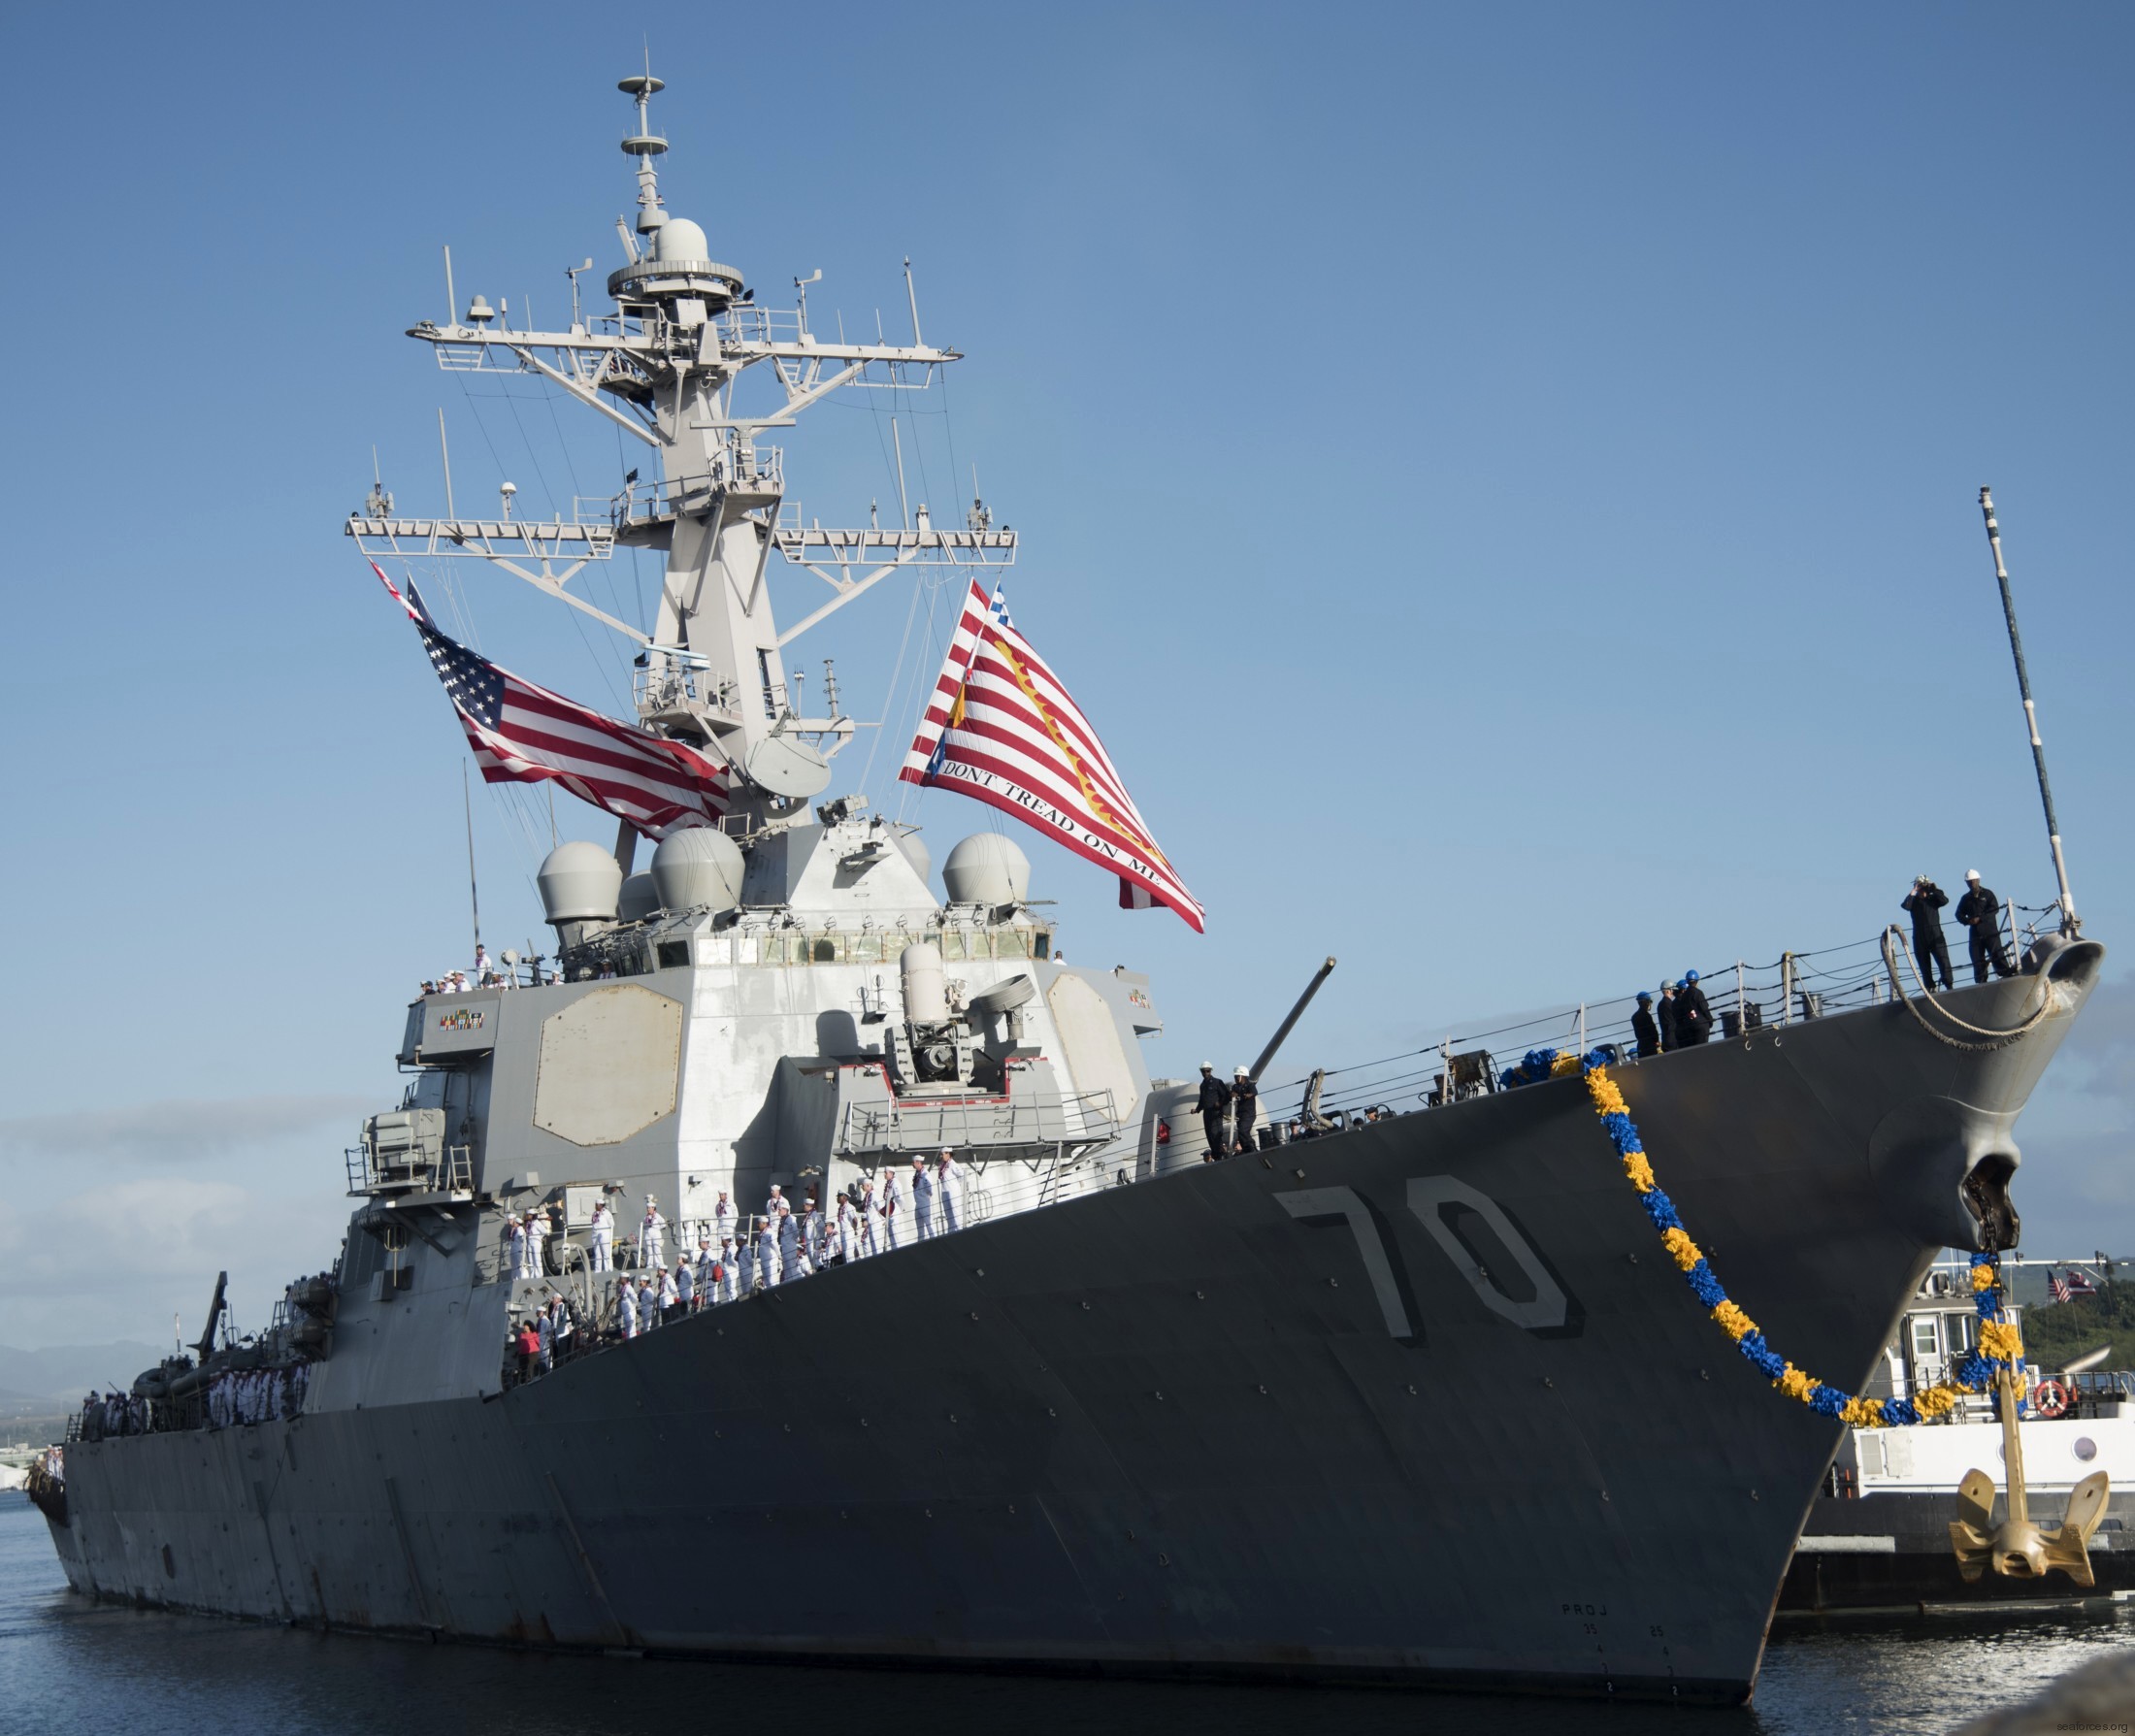 ddg-70 uss hopper guided missile destroyer arleigh burke class aegis bmd 02 joint base pearl harbor hickam hawaii